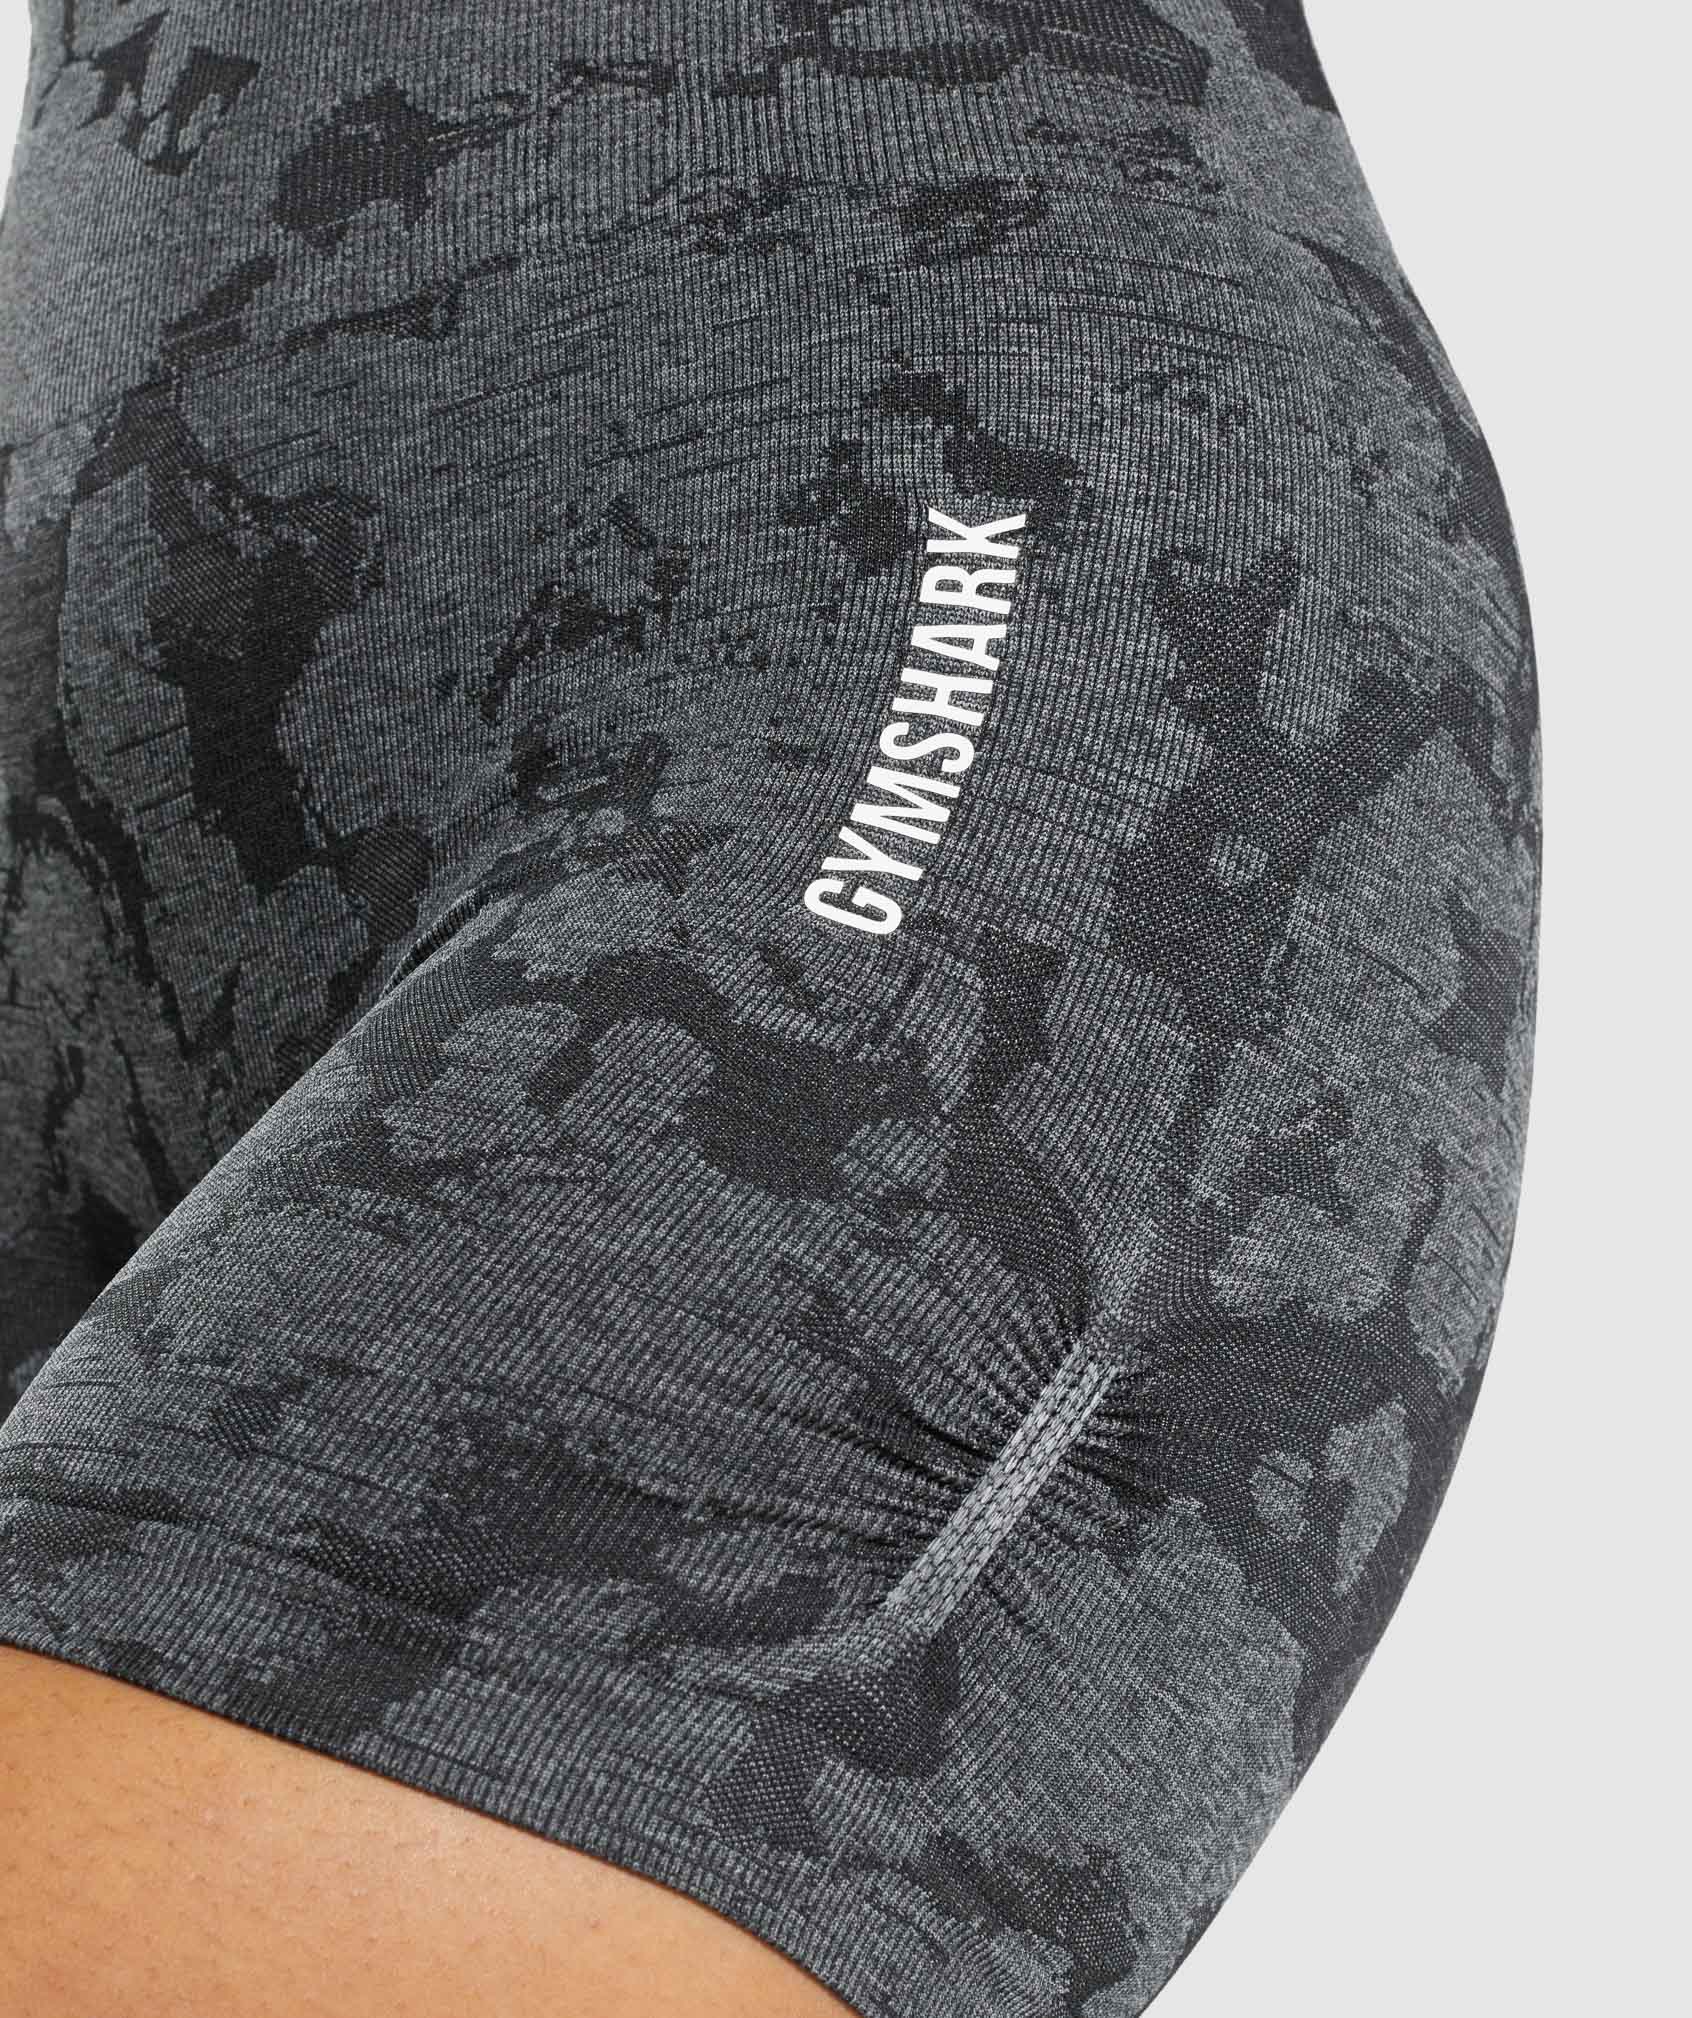 Gymshark Adapt Camo Seamless Shorts Black - $85 New With Tags